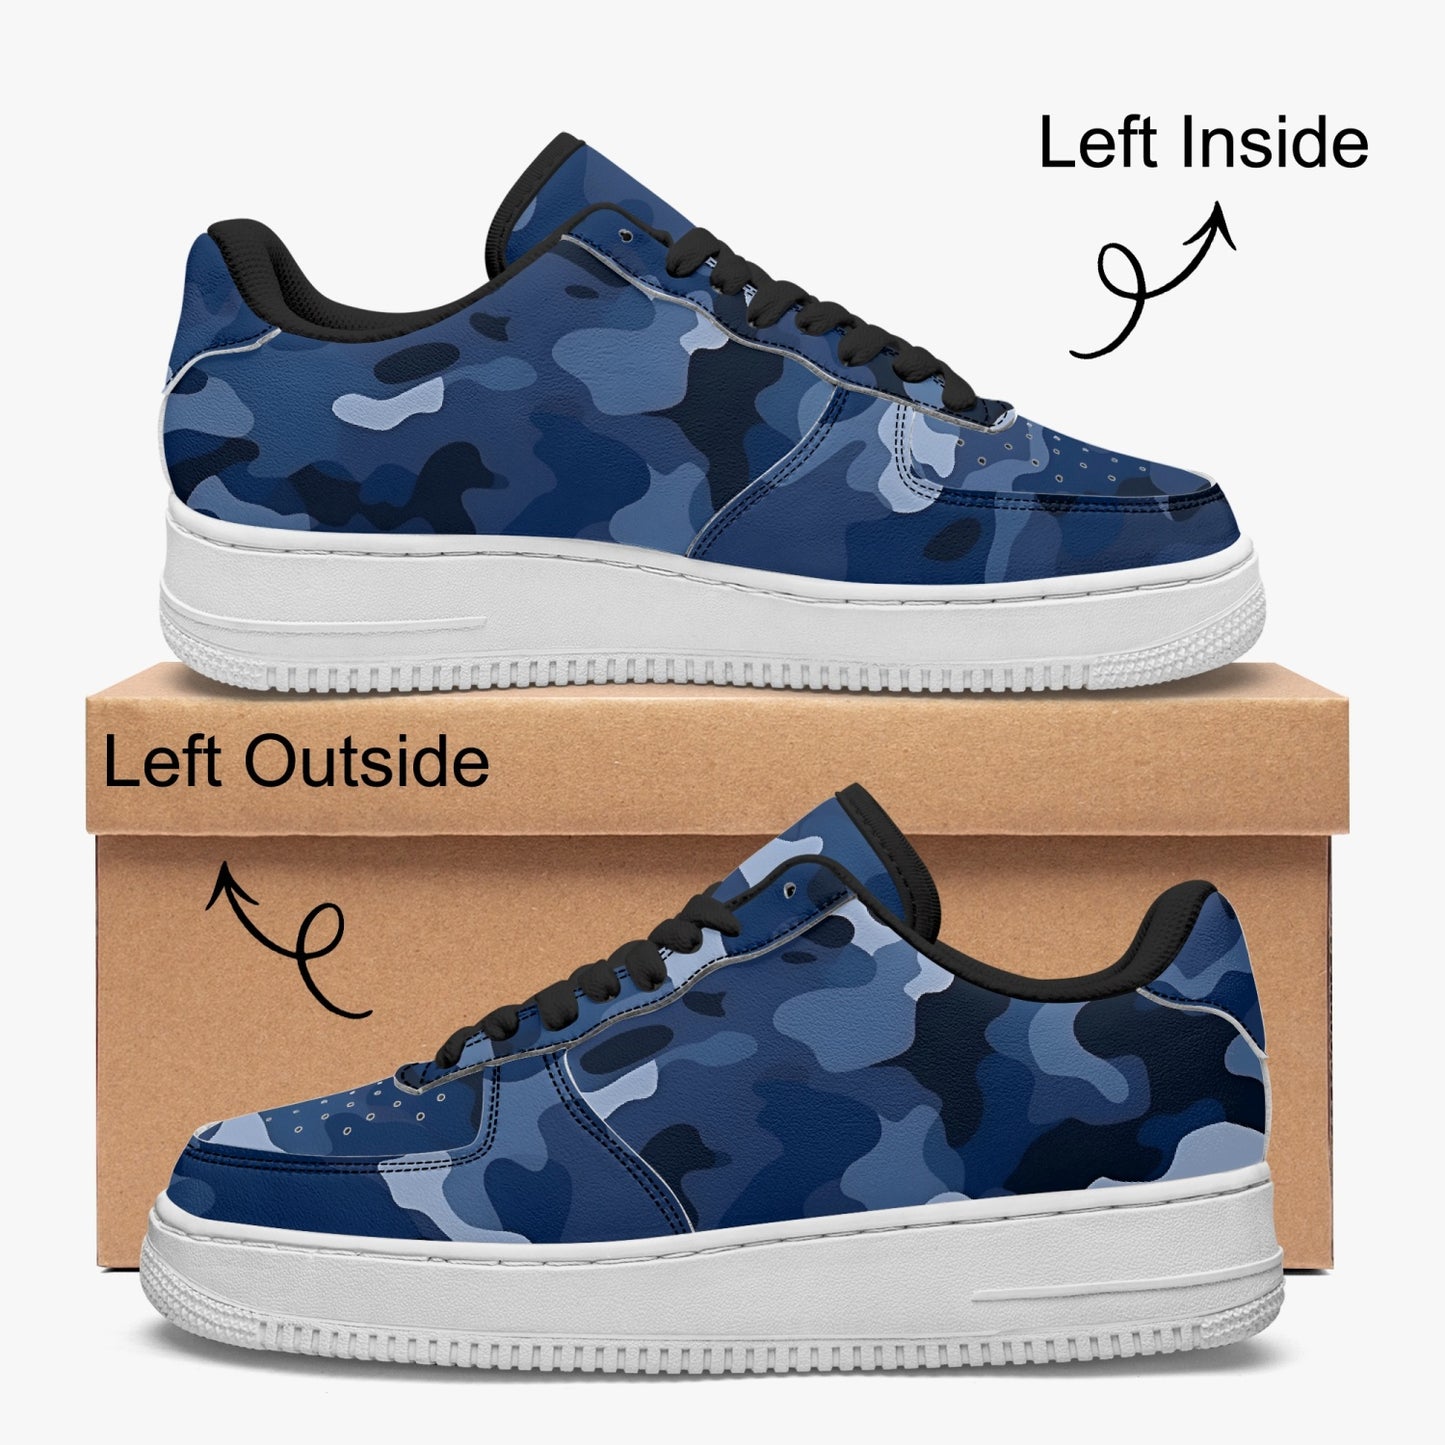 Blue Camo Vegan Leather Shoes, Navy Camouflage Men Women Sneakers White Low Top Lace Up Custom Designer Flat Casual Handmade